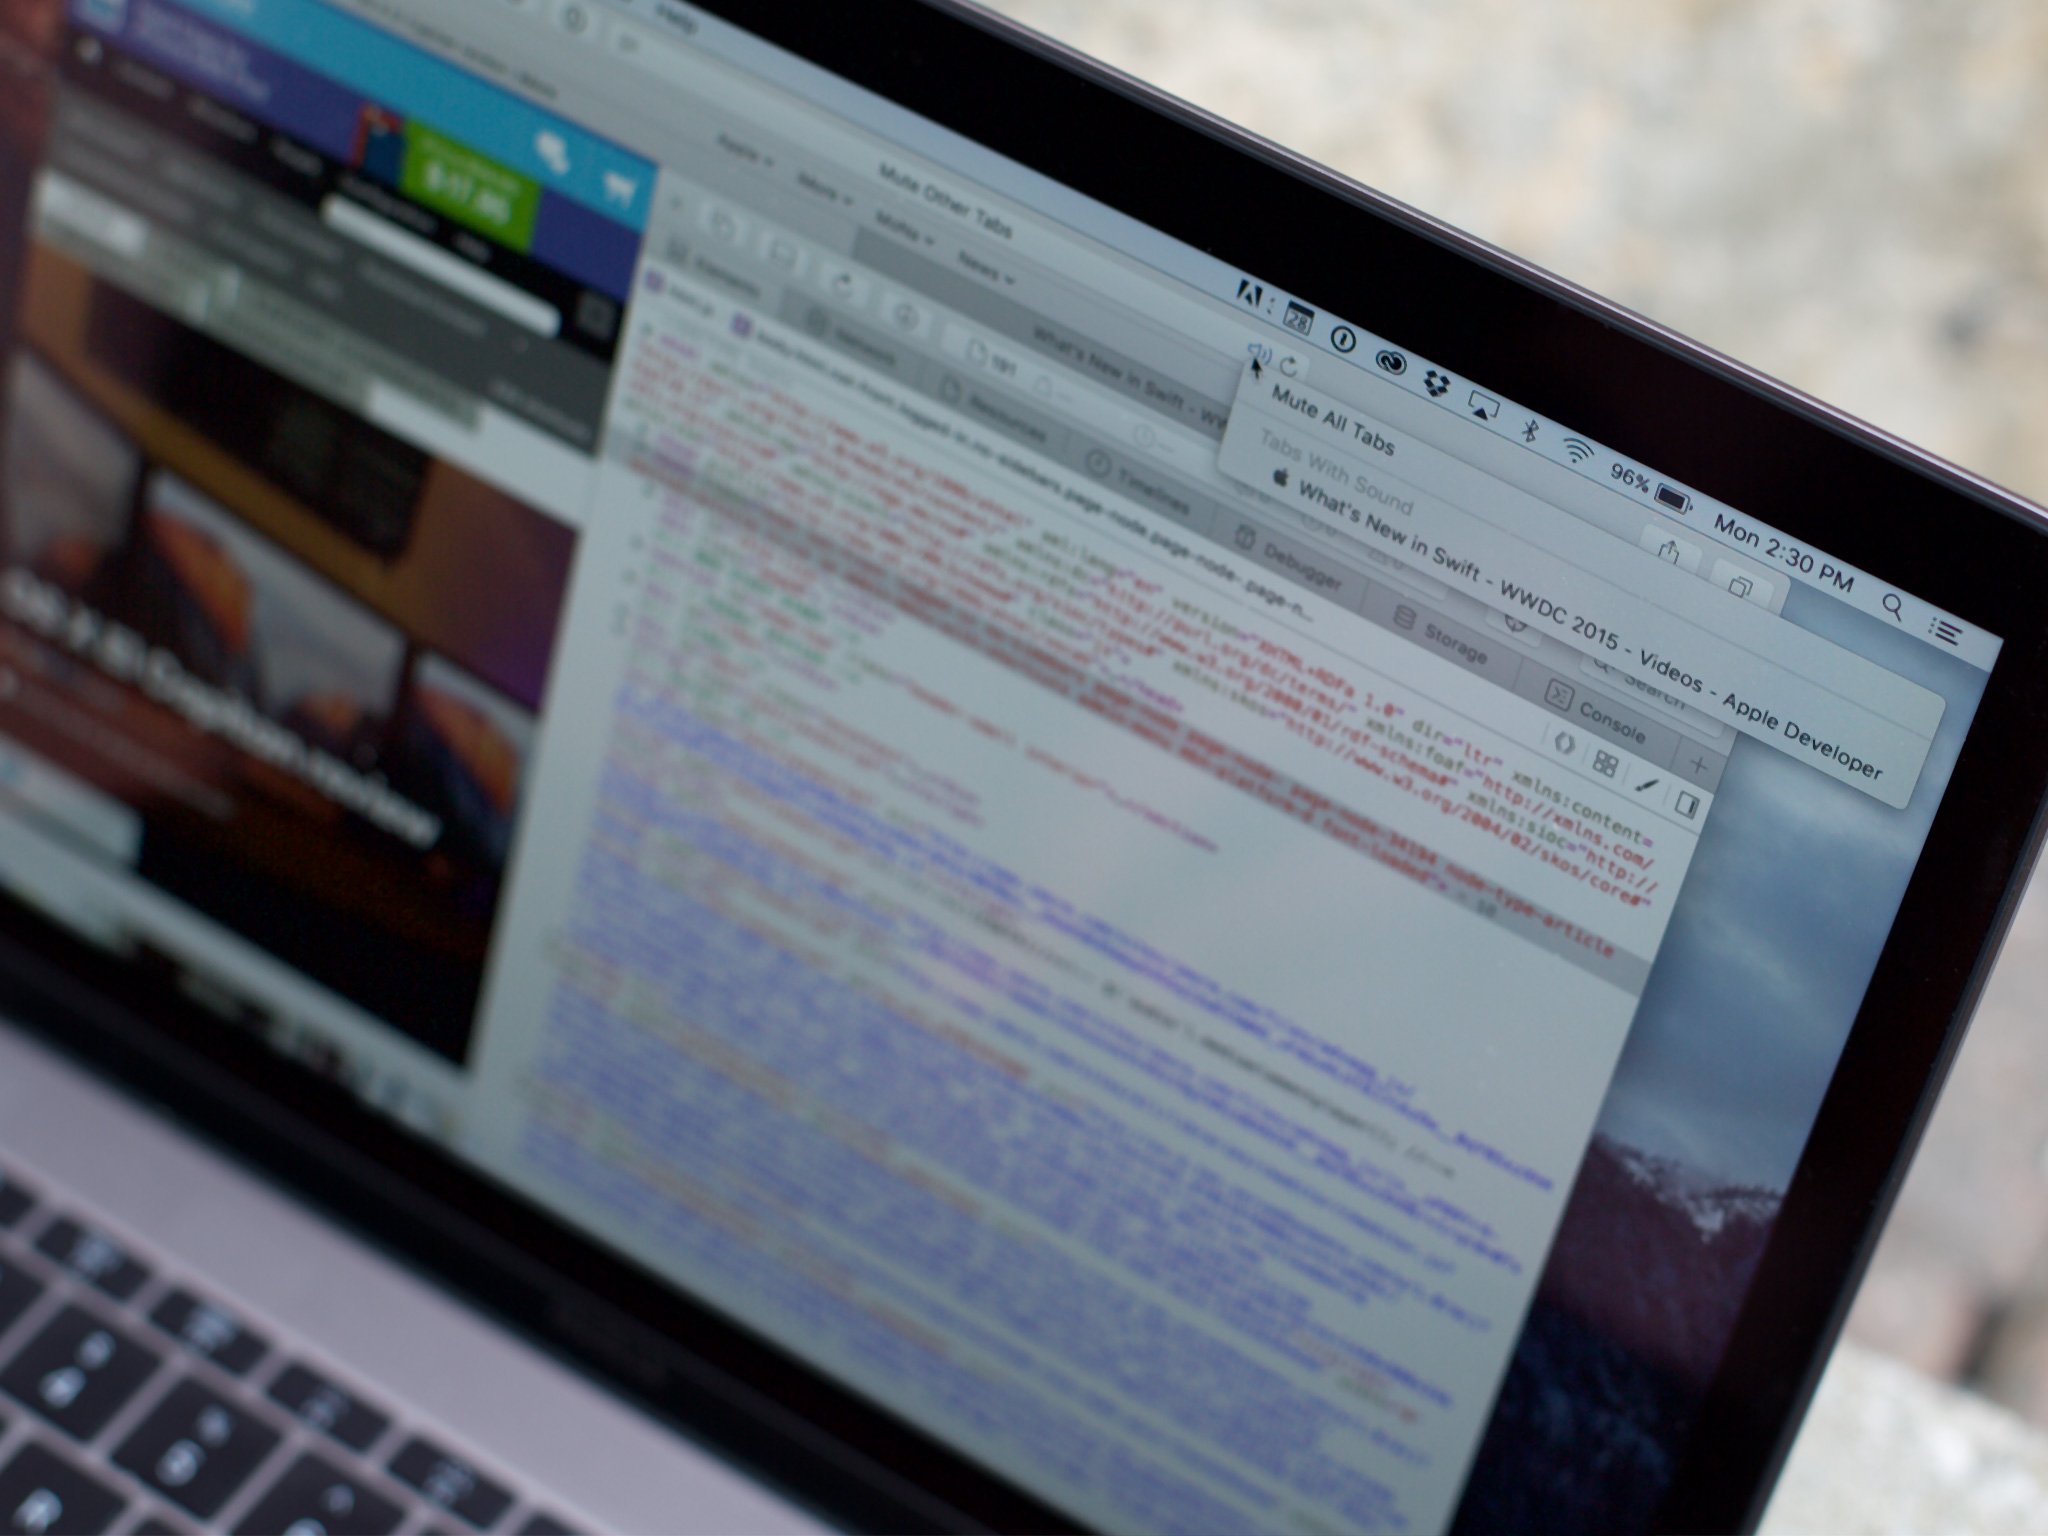 Here are the ad blocker extensions for OS X El Capitan